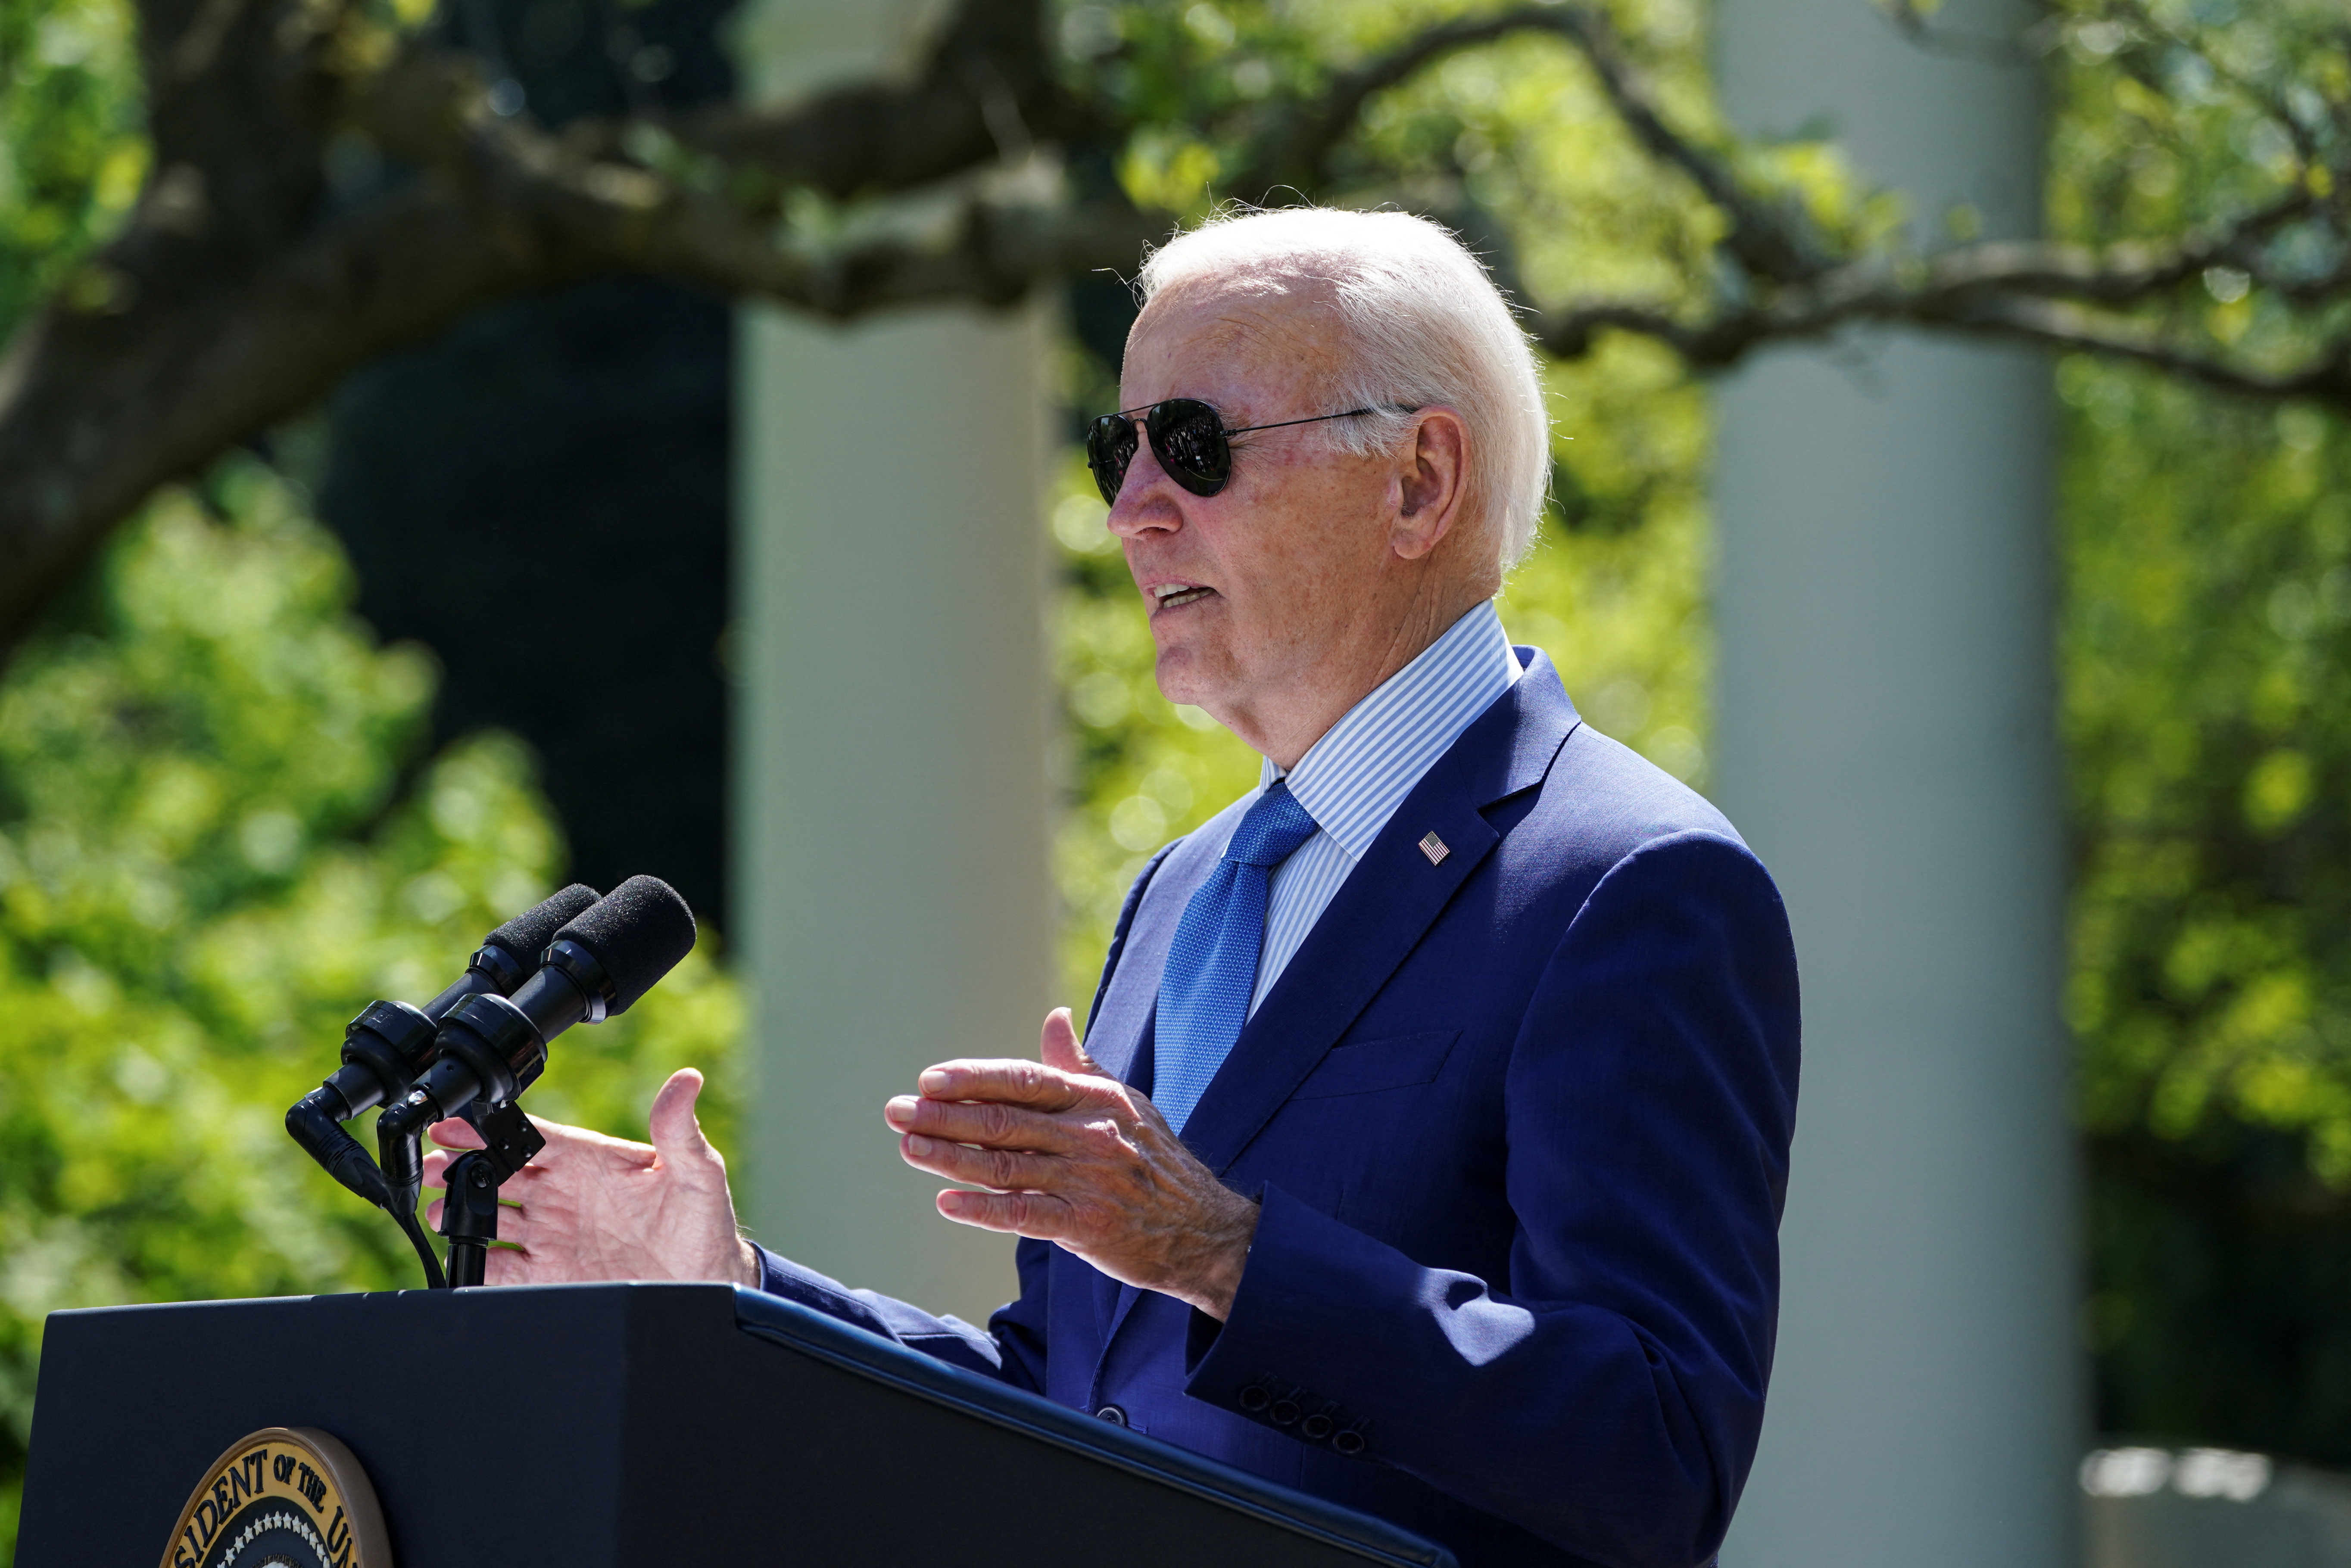 U.S. President Joe Biden signs executive order on 'environmental justice' during Rose Garden event at the White House in Washington